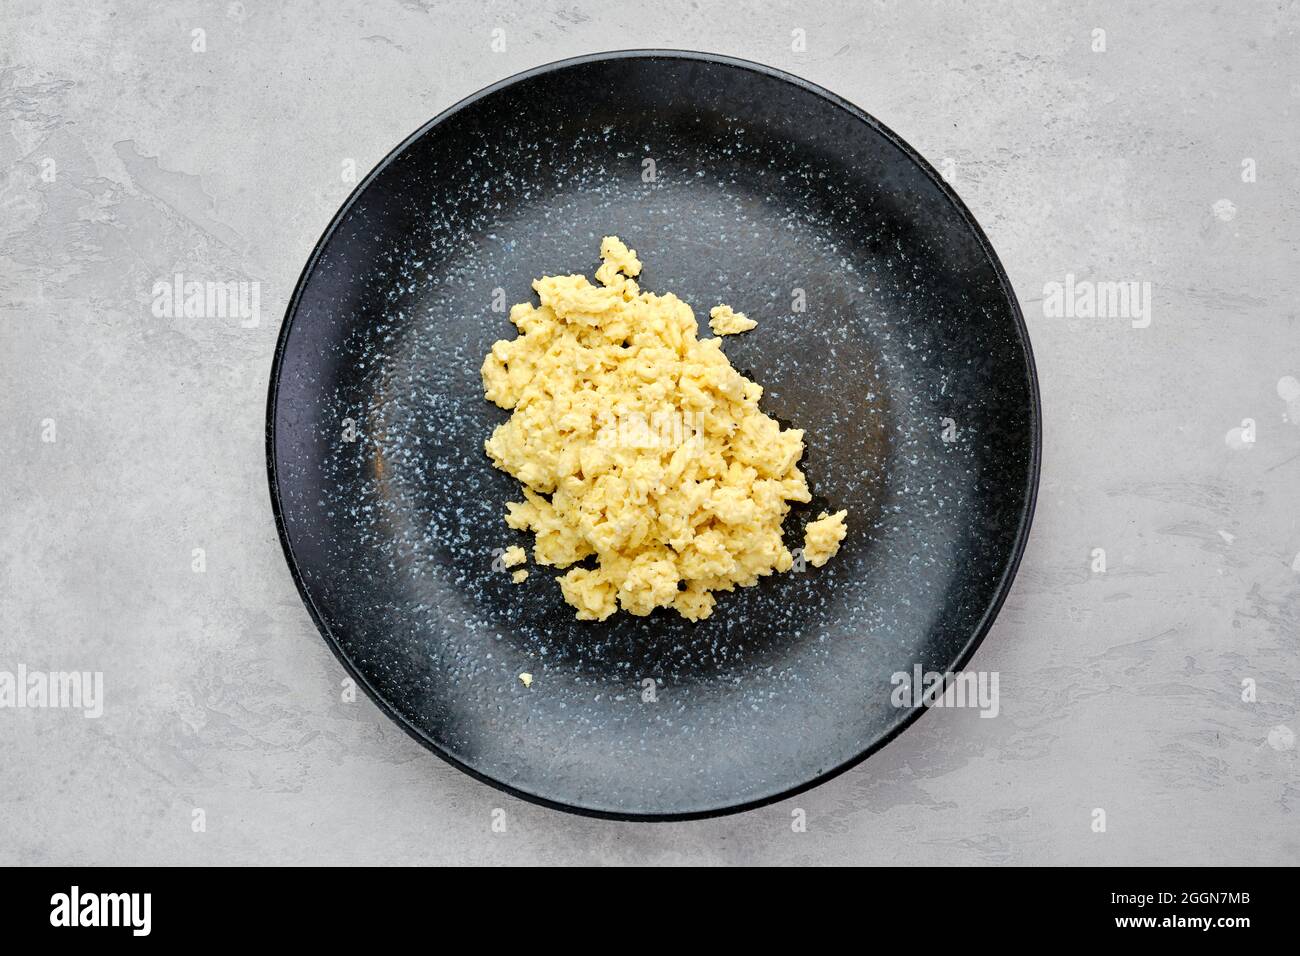 Top View Of Classic Scrambled Eggs On A Plate Stock Photo Alamy